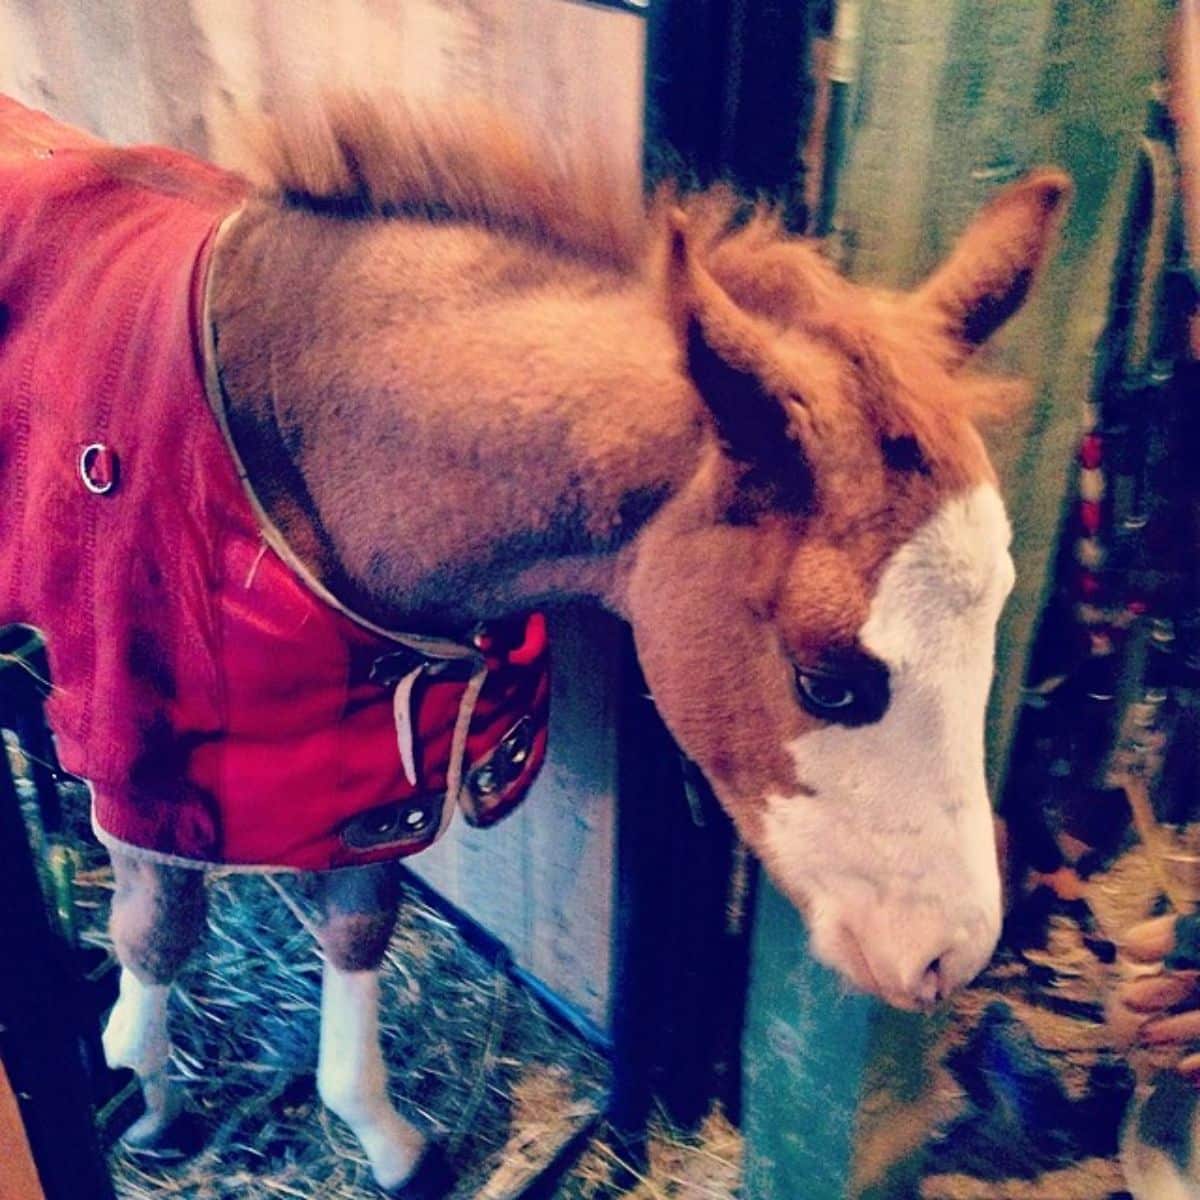 A brown pony with blue eyes wearing a red coat in a stable.